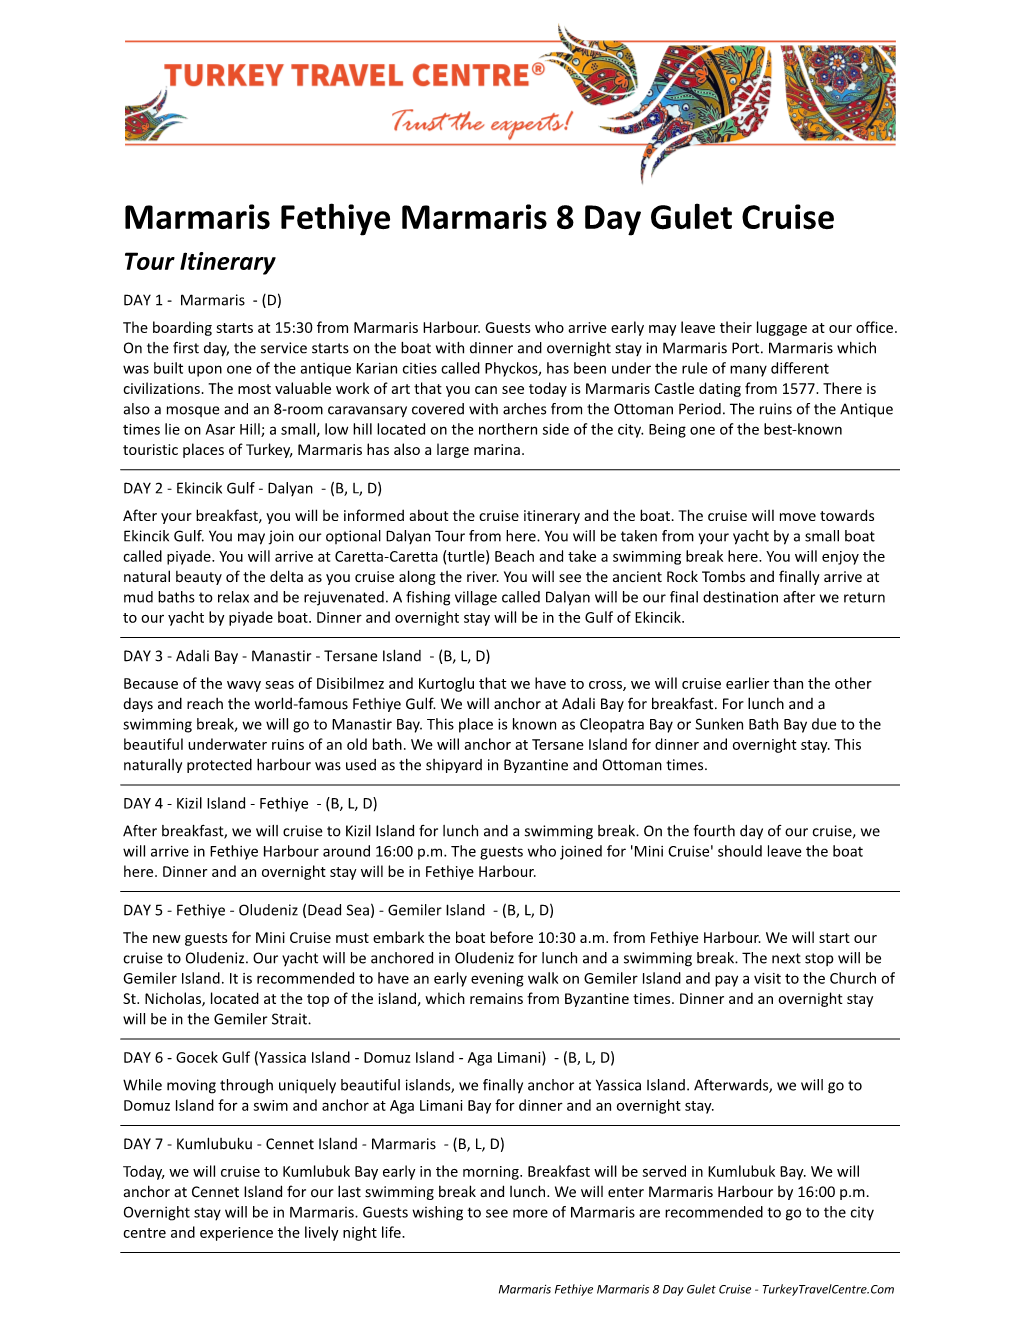 Marmaris Fethiye Marmaris 8 Day Gulet Cruise Tour Itinerary DAY 1 - Marmaris - (D) the Boarding Starts at 15:30 from Marmaris Harbour